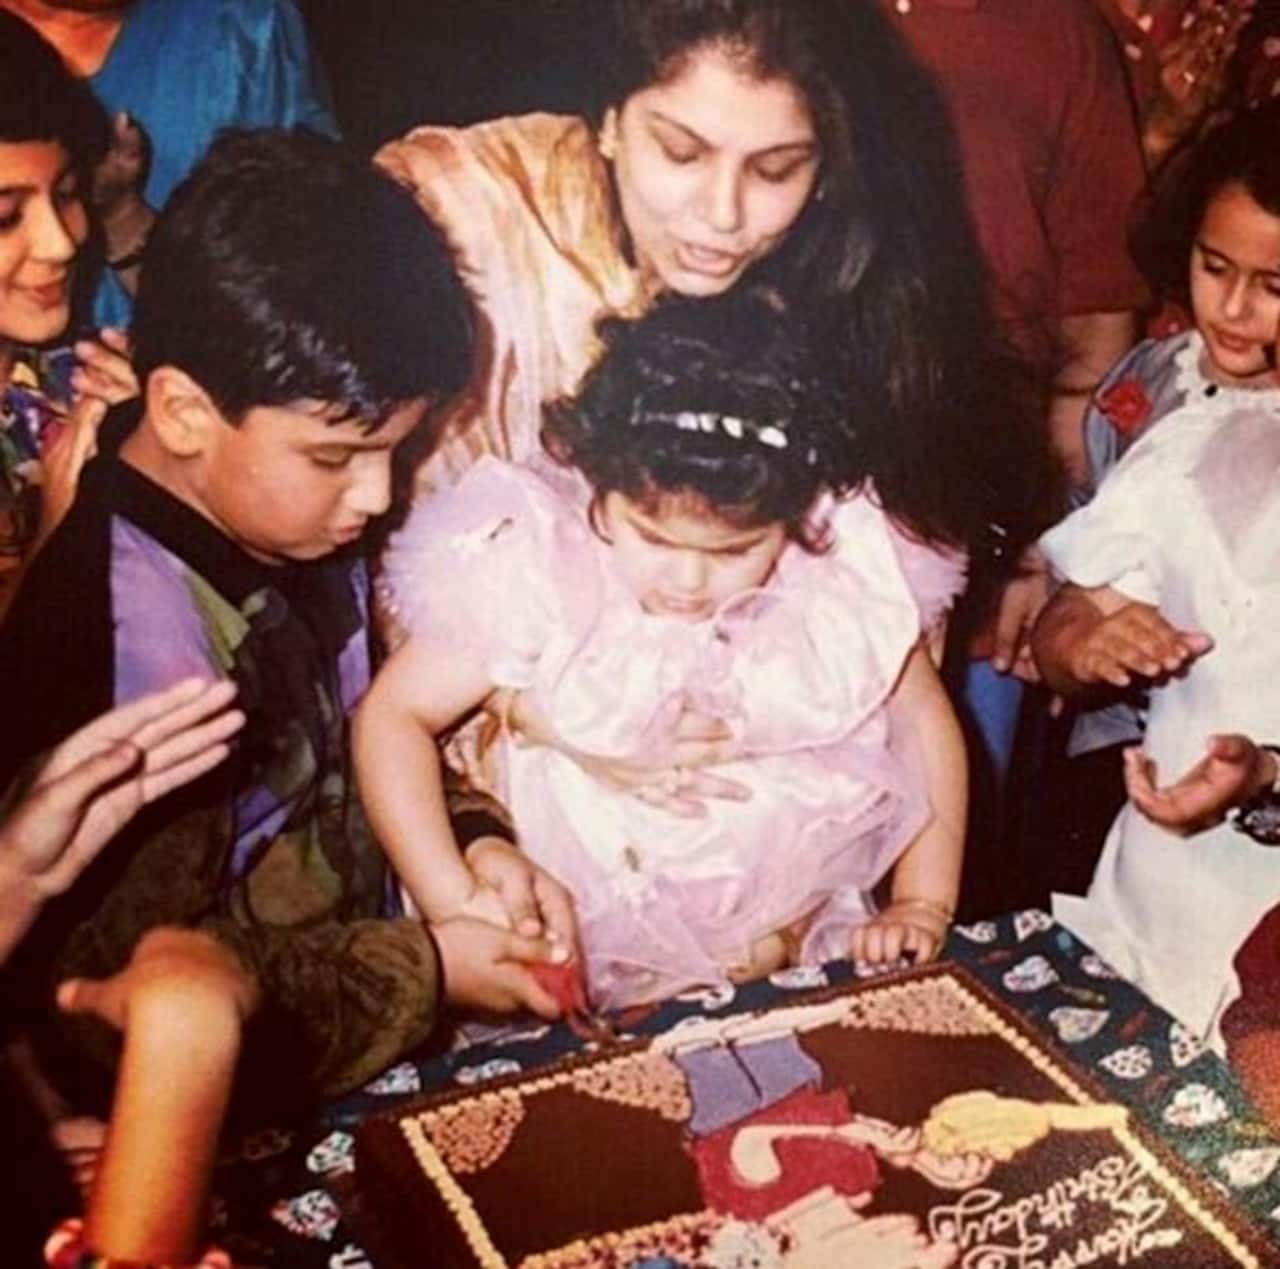 Arjun Kapoor's special birthday wish for his mom will make your heart melt- view pic!